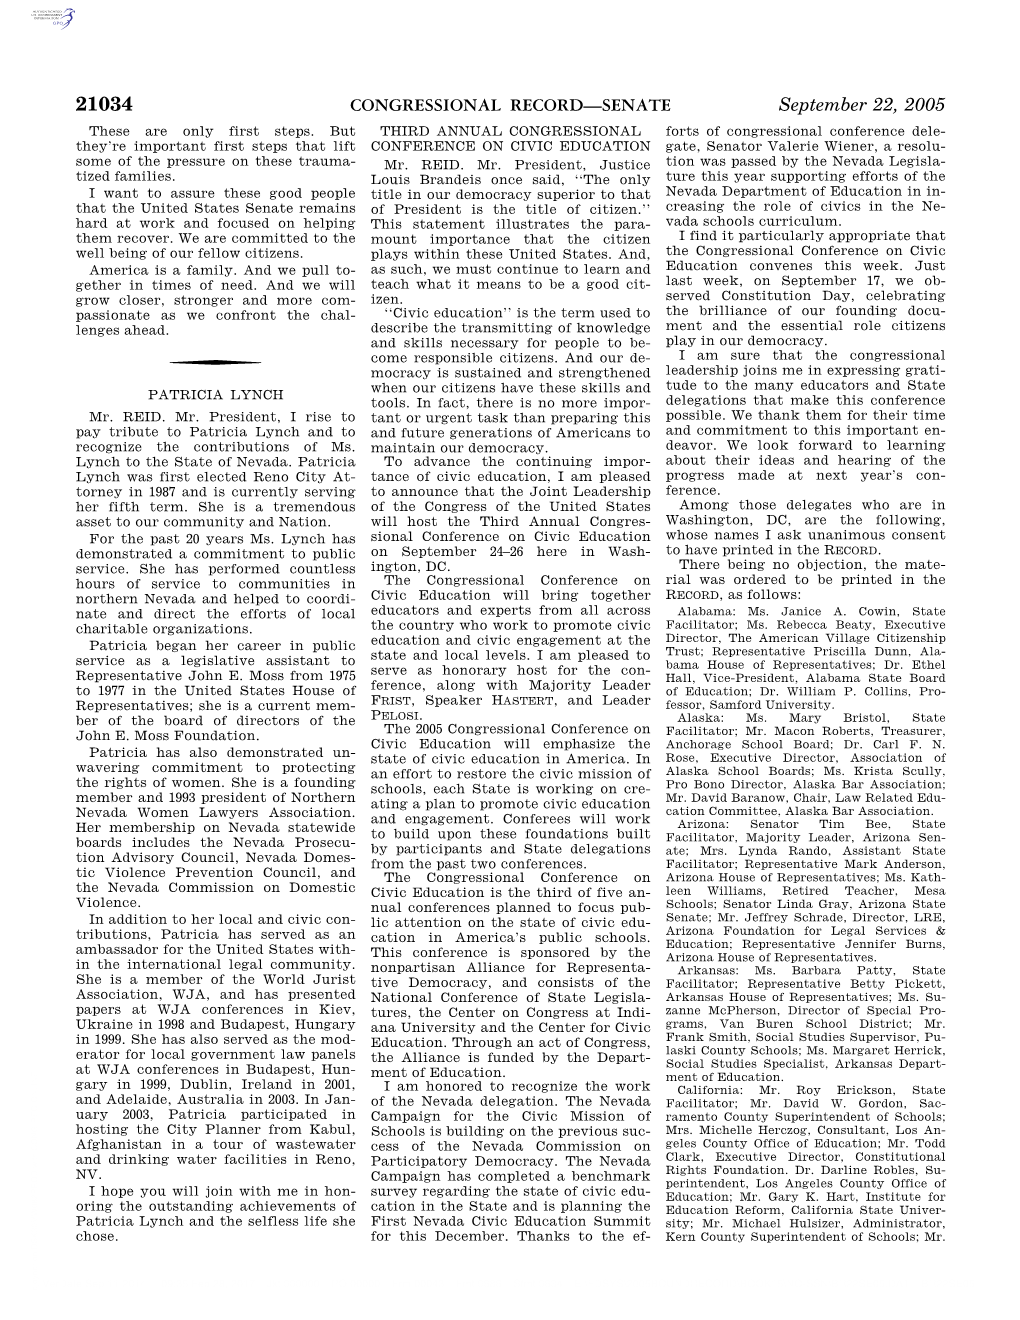 CONGRESSIONAL RECORD—SENATE September 22, 2005 These Are Only First Steps